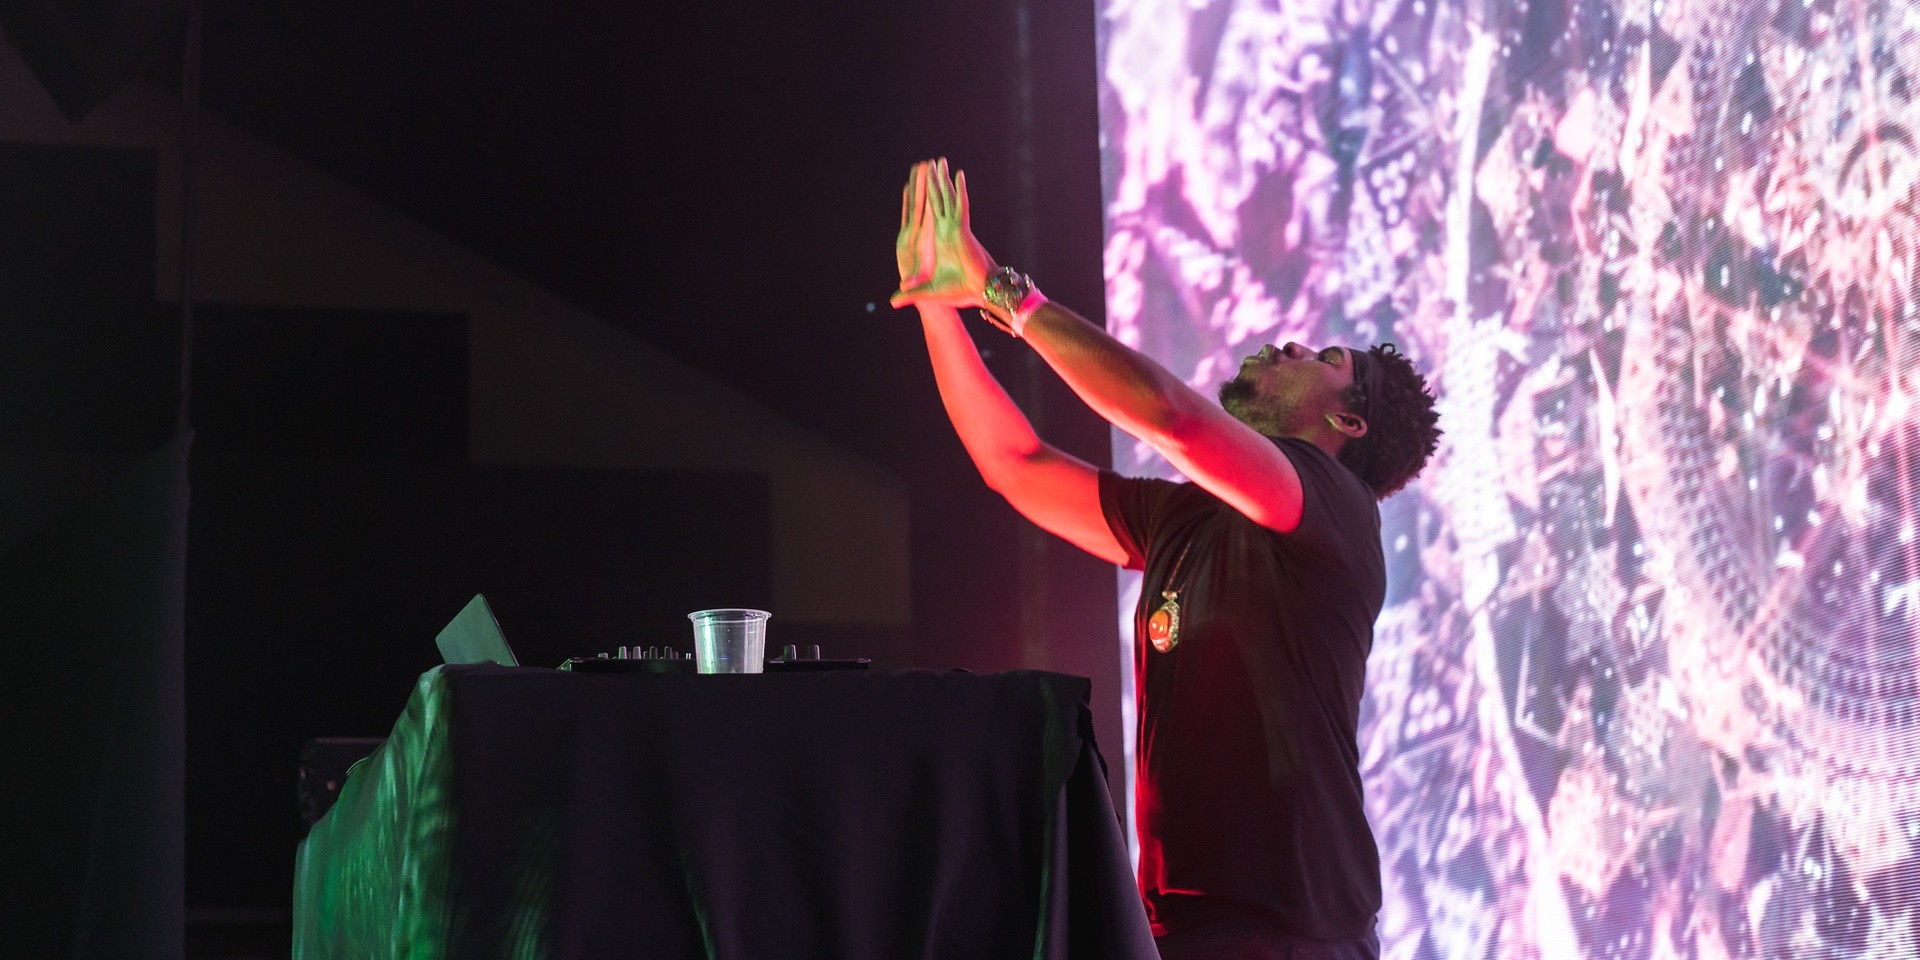 GIG REPORT: Flying Lotus' debut in Singapore a scattershot, off-the-cuff, psychedelic affair